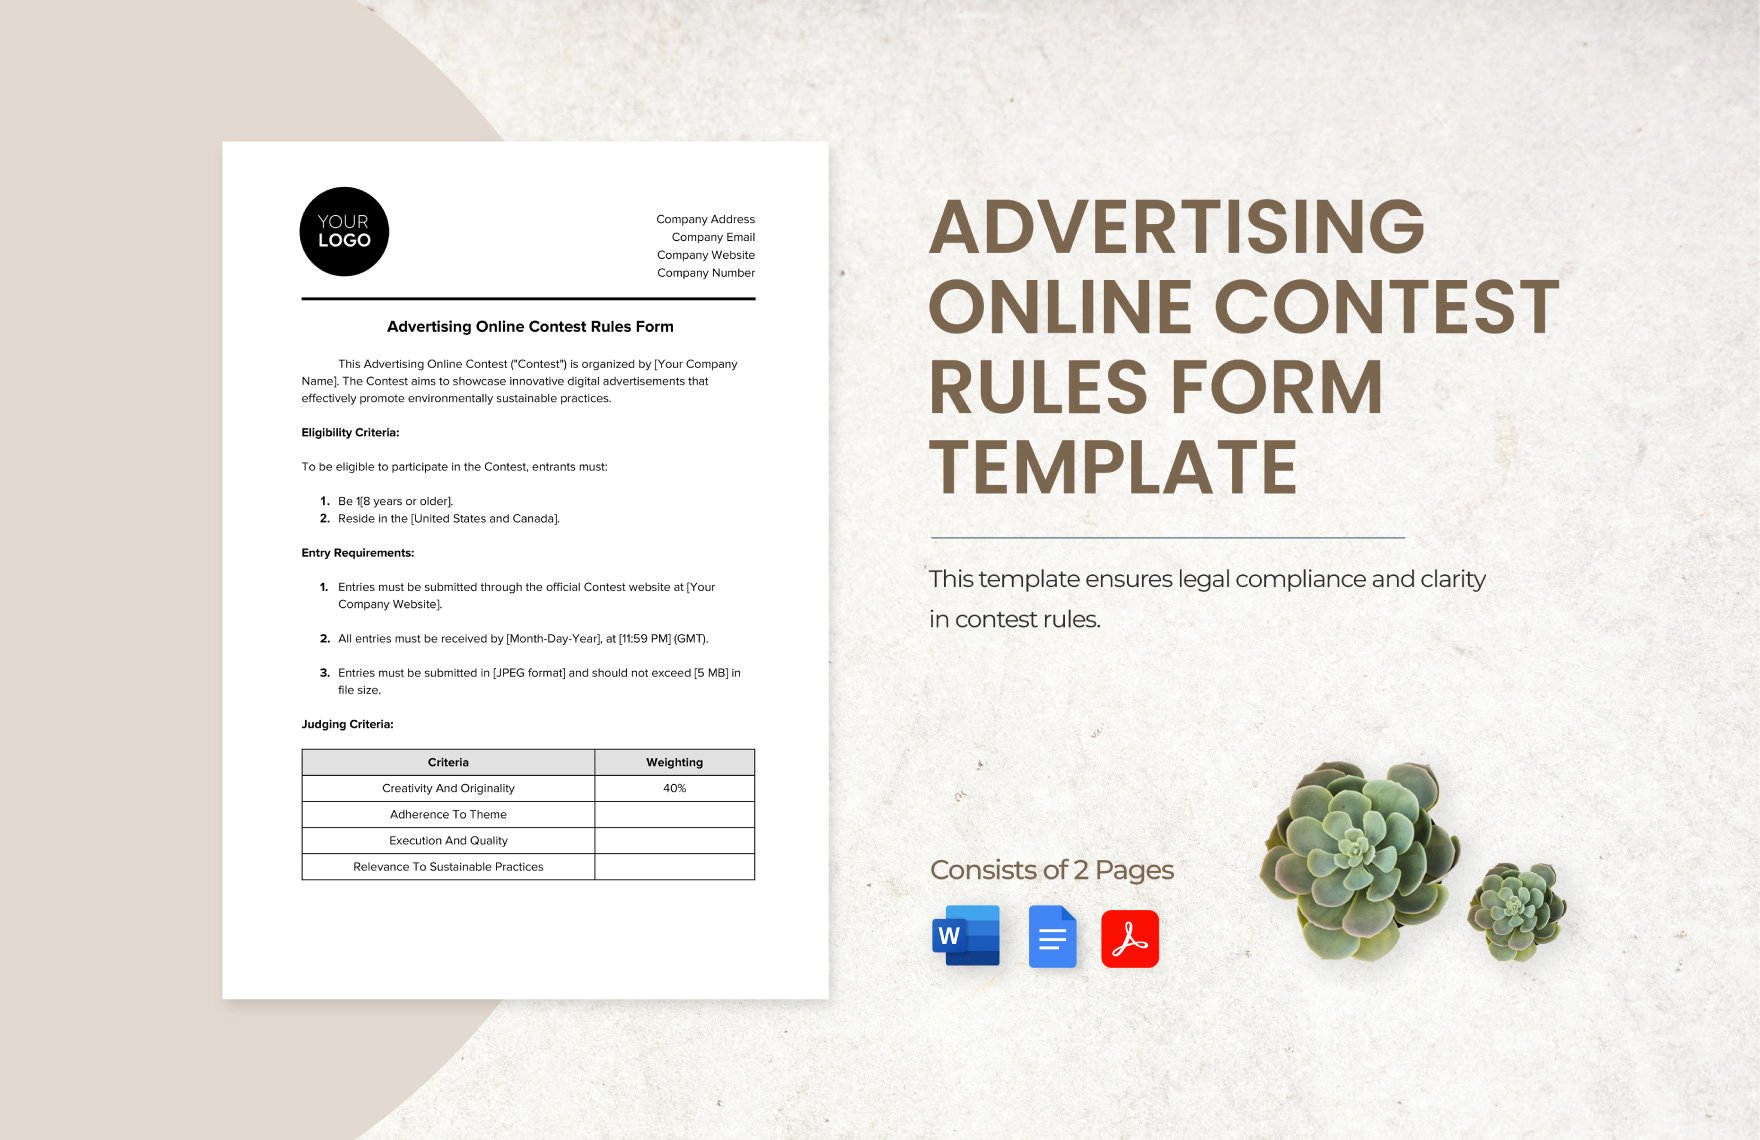 Advertising Online Contest Rules Form Template in Word, Google Docs, PDF